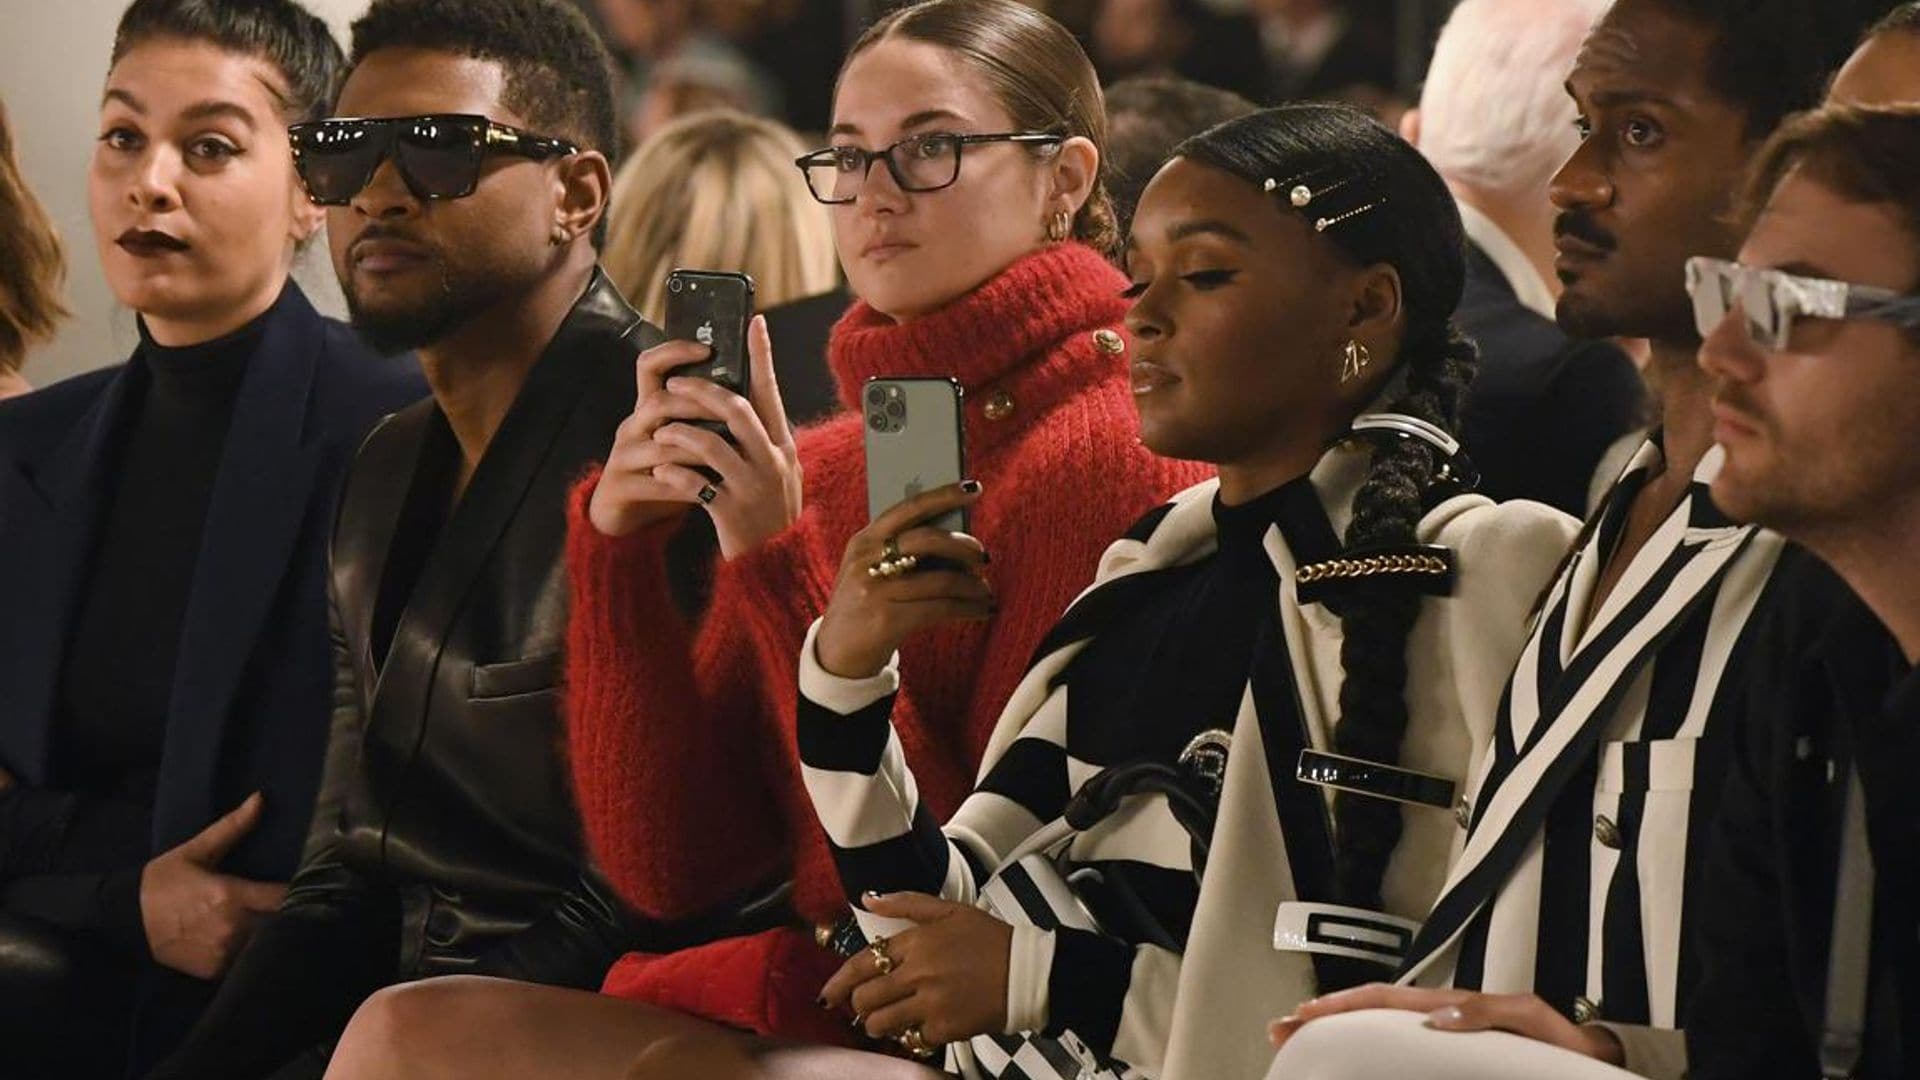 All the latest photos, celebs and style news from Paris Fashion Week